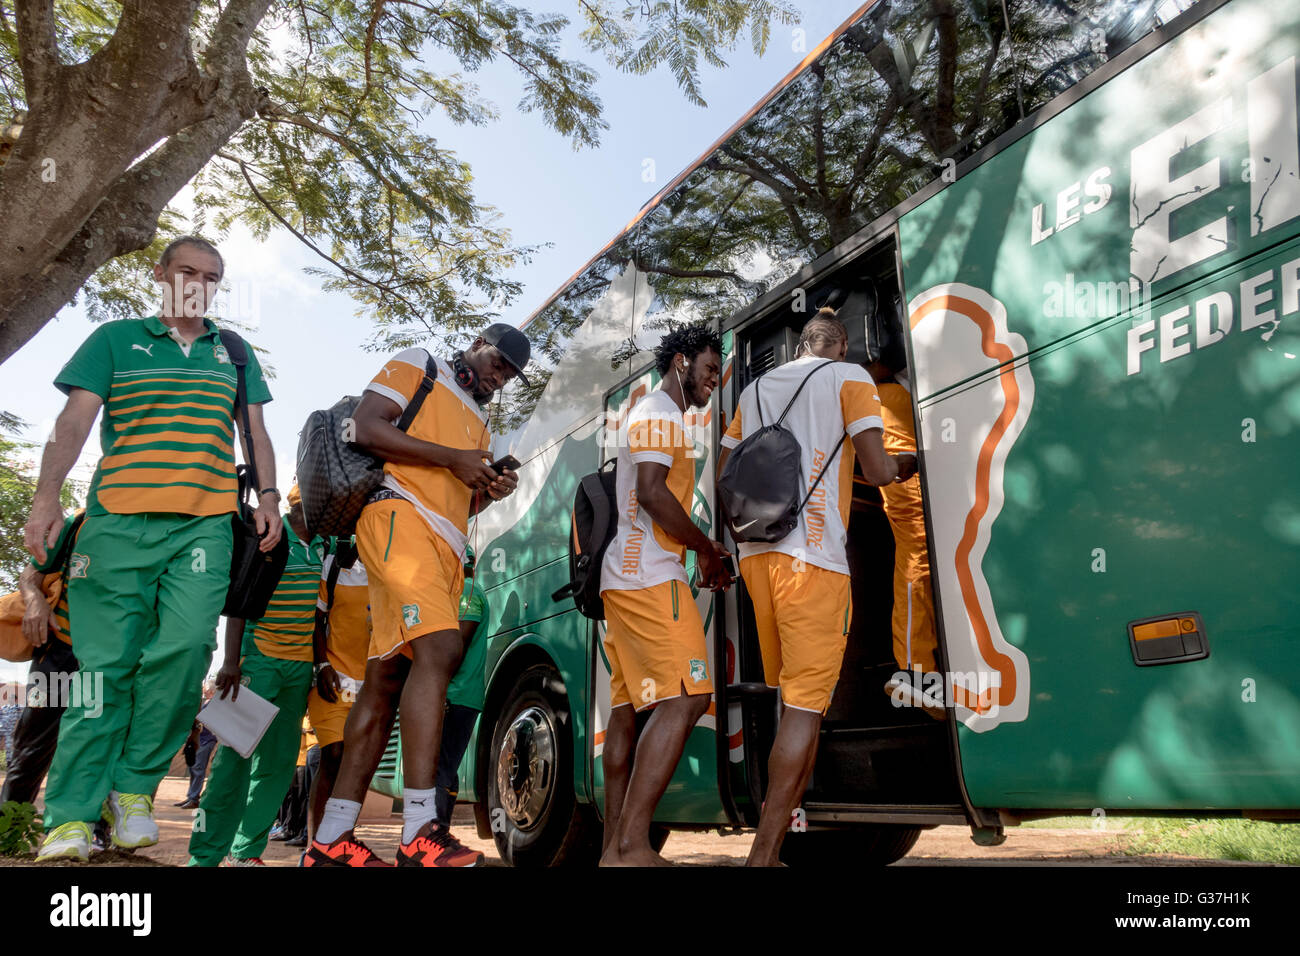 Coach Michel Dussuyer (L) boarding the bus with the Ivory Coast team ready to play a friendly against Gabon at Stade Bouaké Stock Photo